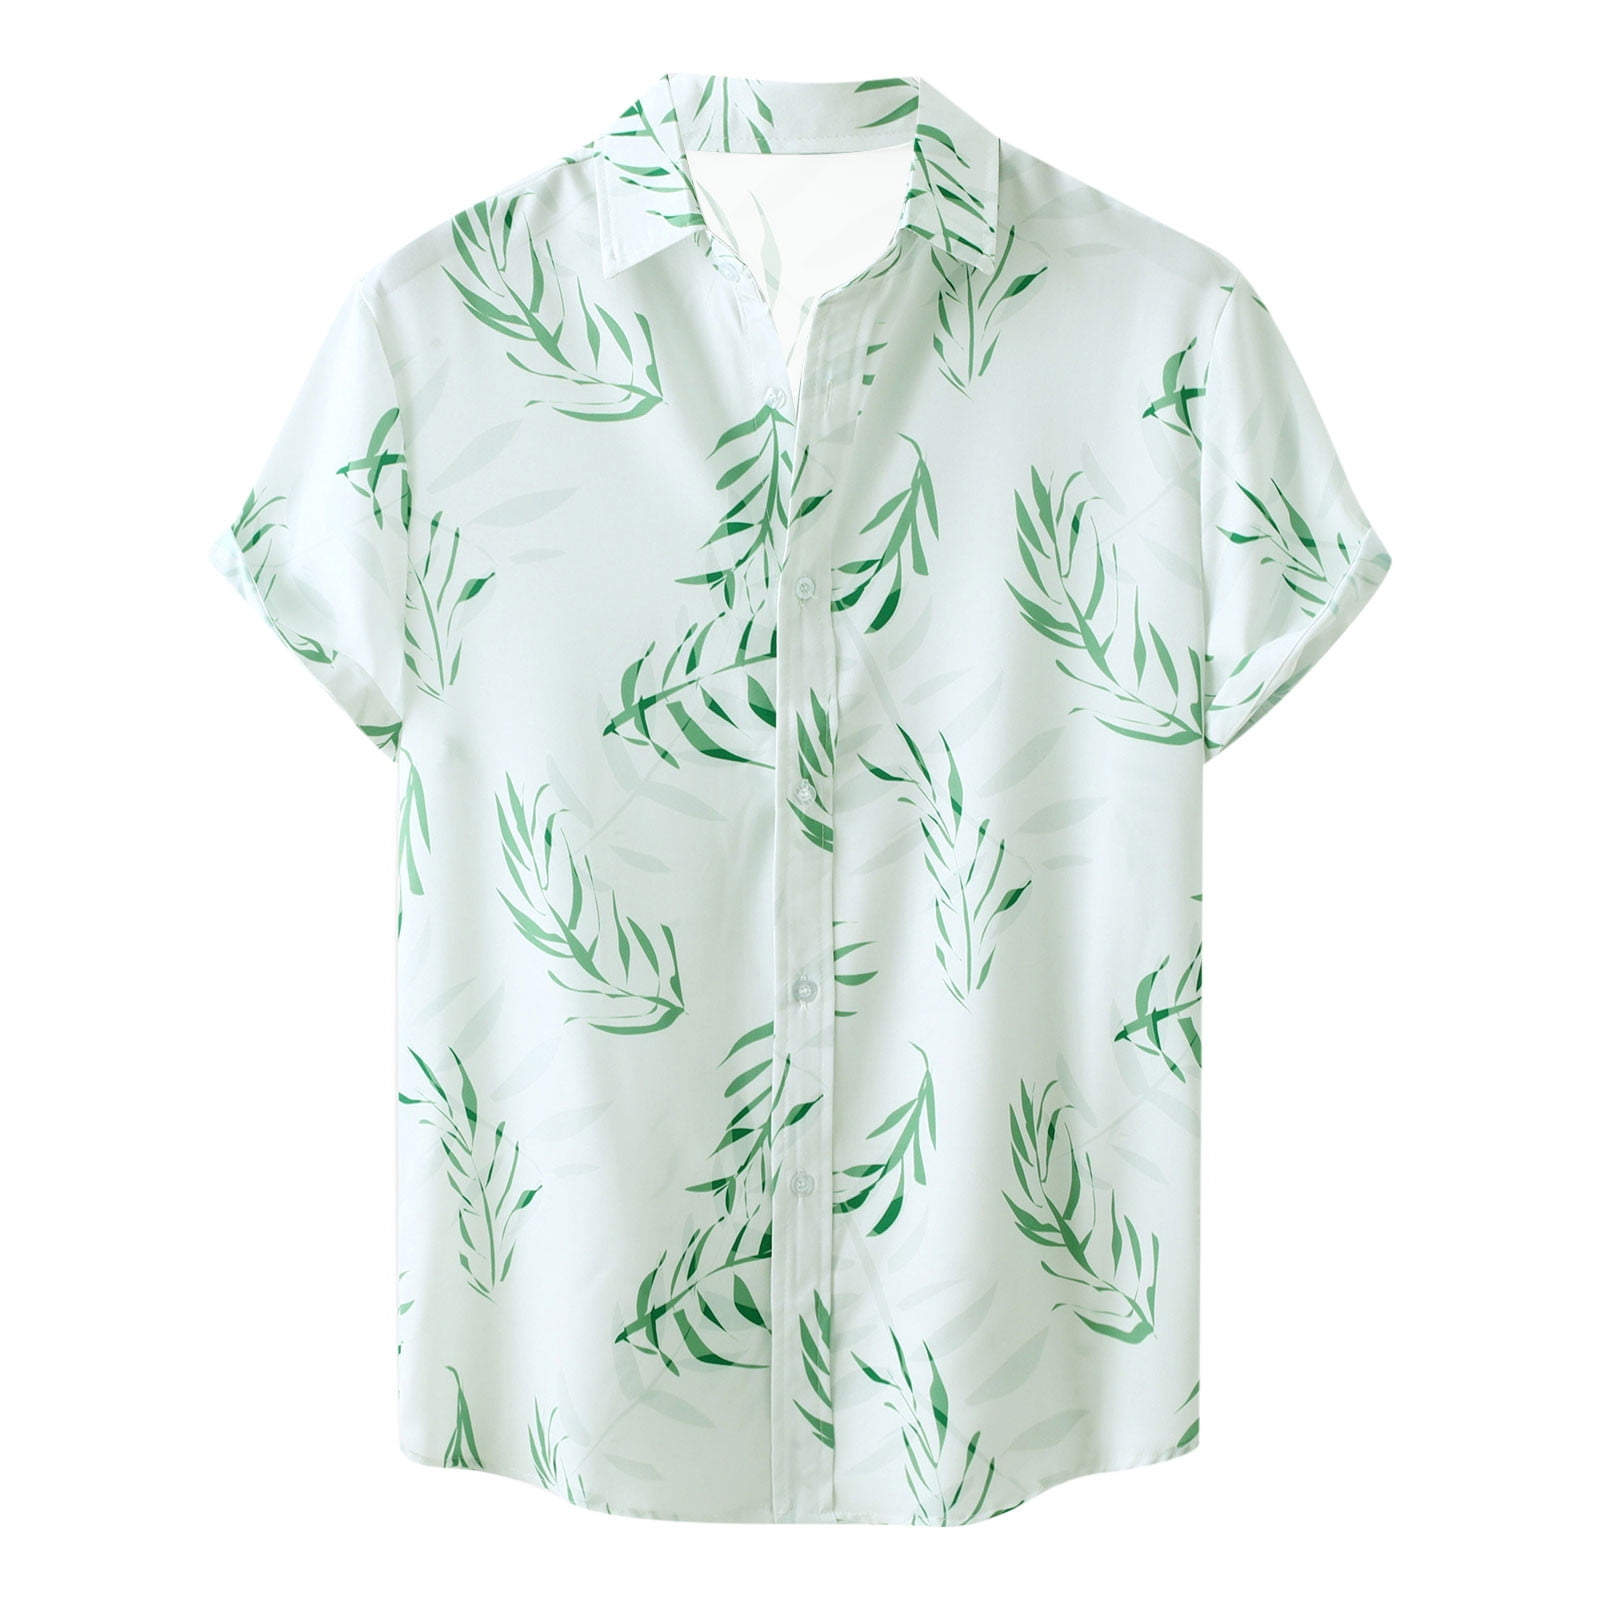 VSSSJ Floral Print Shirt for Men Plus Size Short Sleeve Casual Button Down  Collared Tee Top Breathable Stretch Aloha Hawaiian Tshirts Mint Green XXL